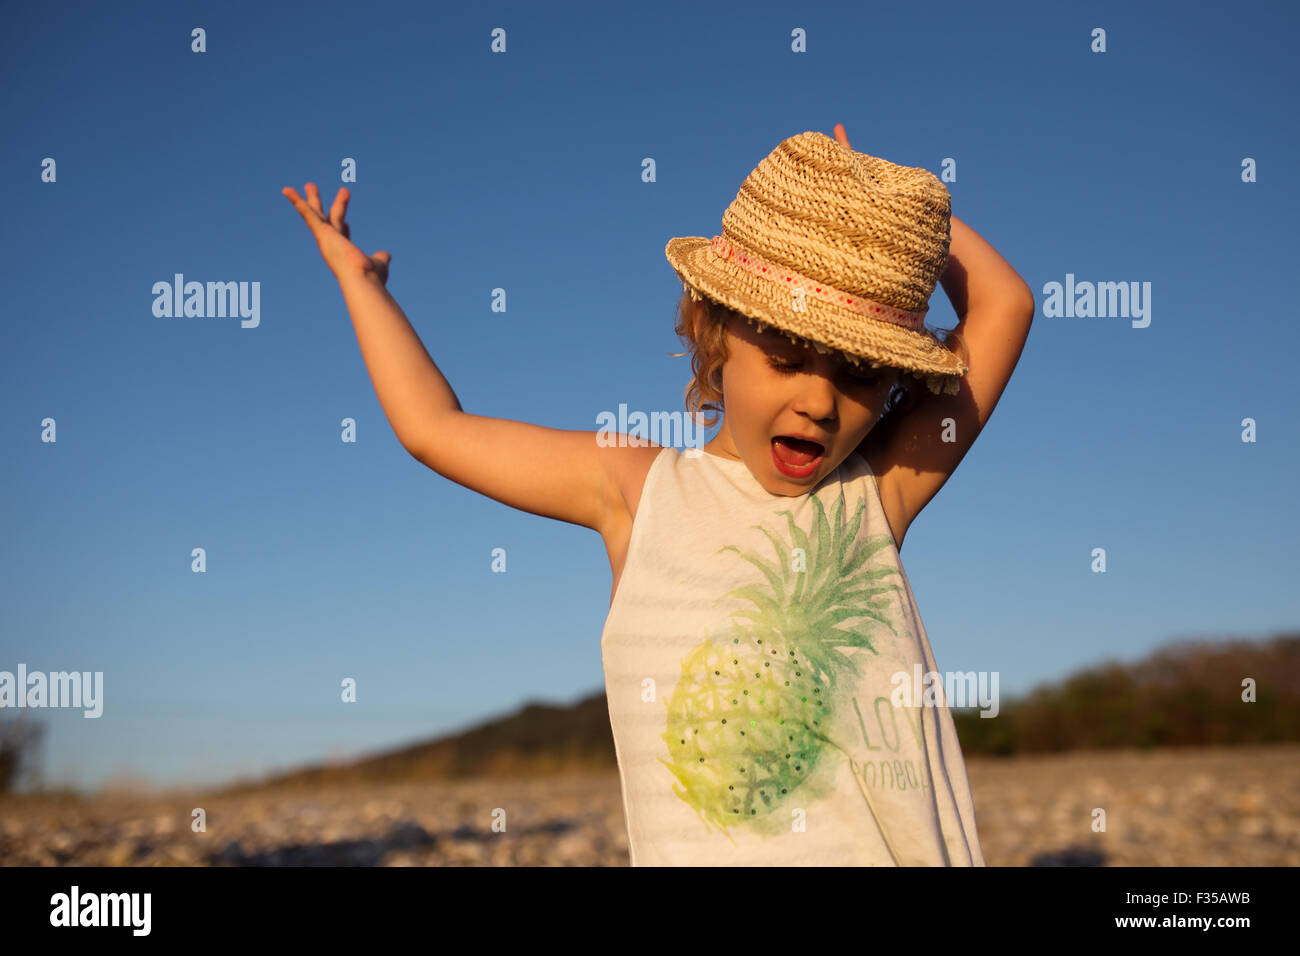 Cute little girl emotional outdoor portrait in warm light of sunset Stock Photo